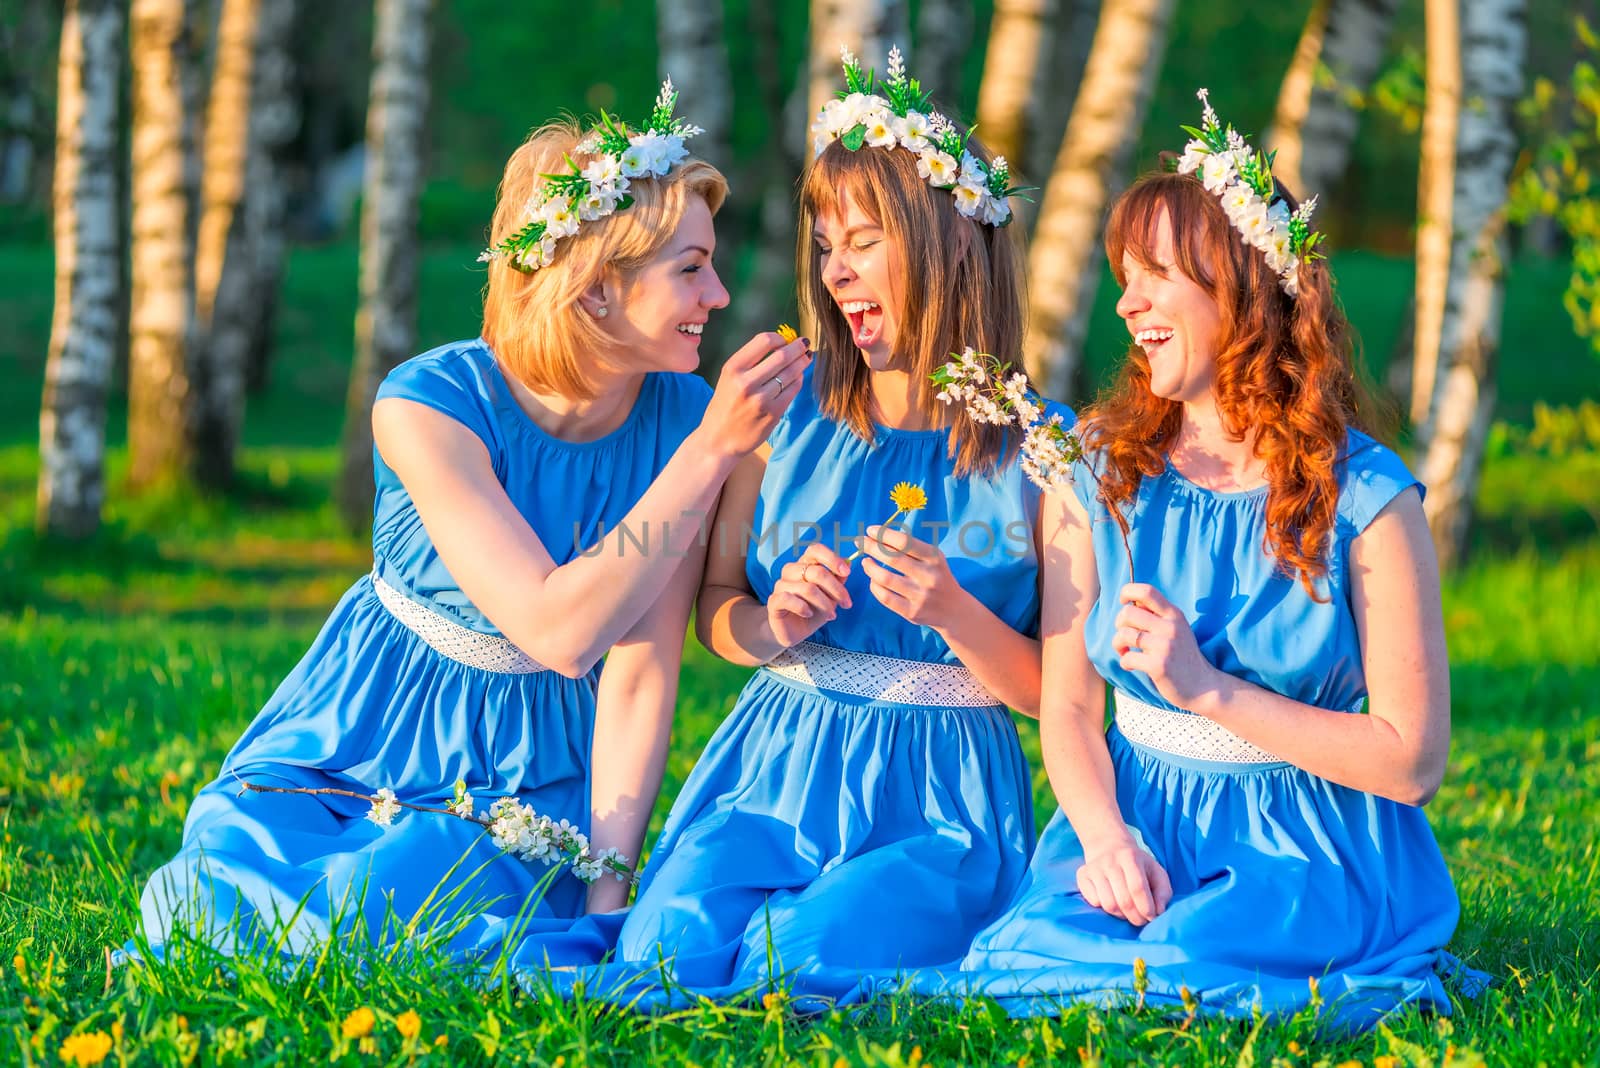 Three girls on the lawn in equally clothes having fun